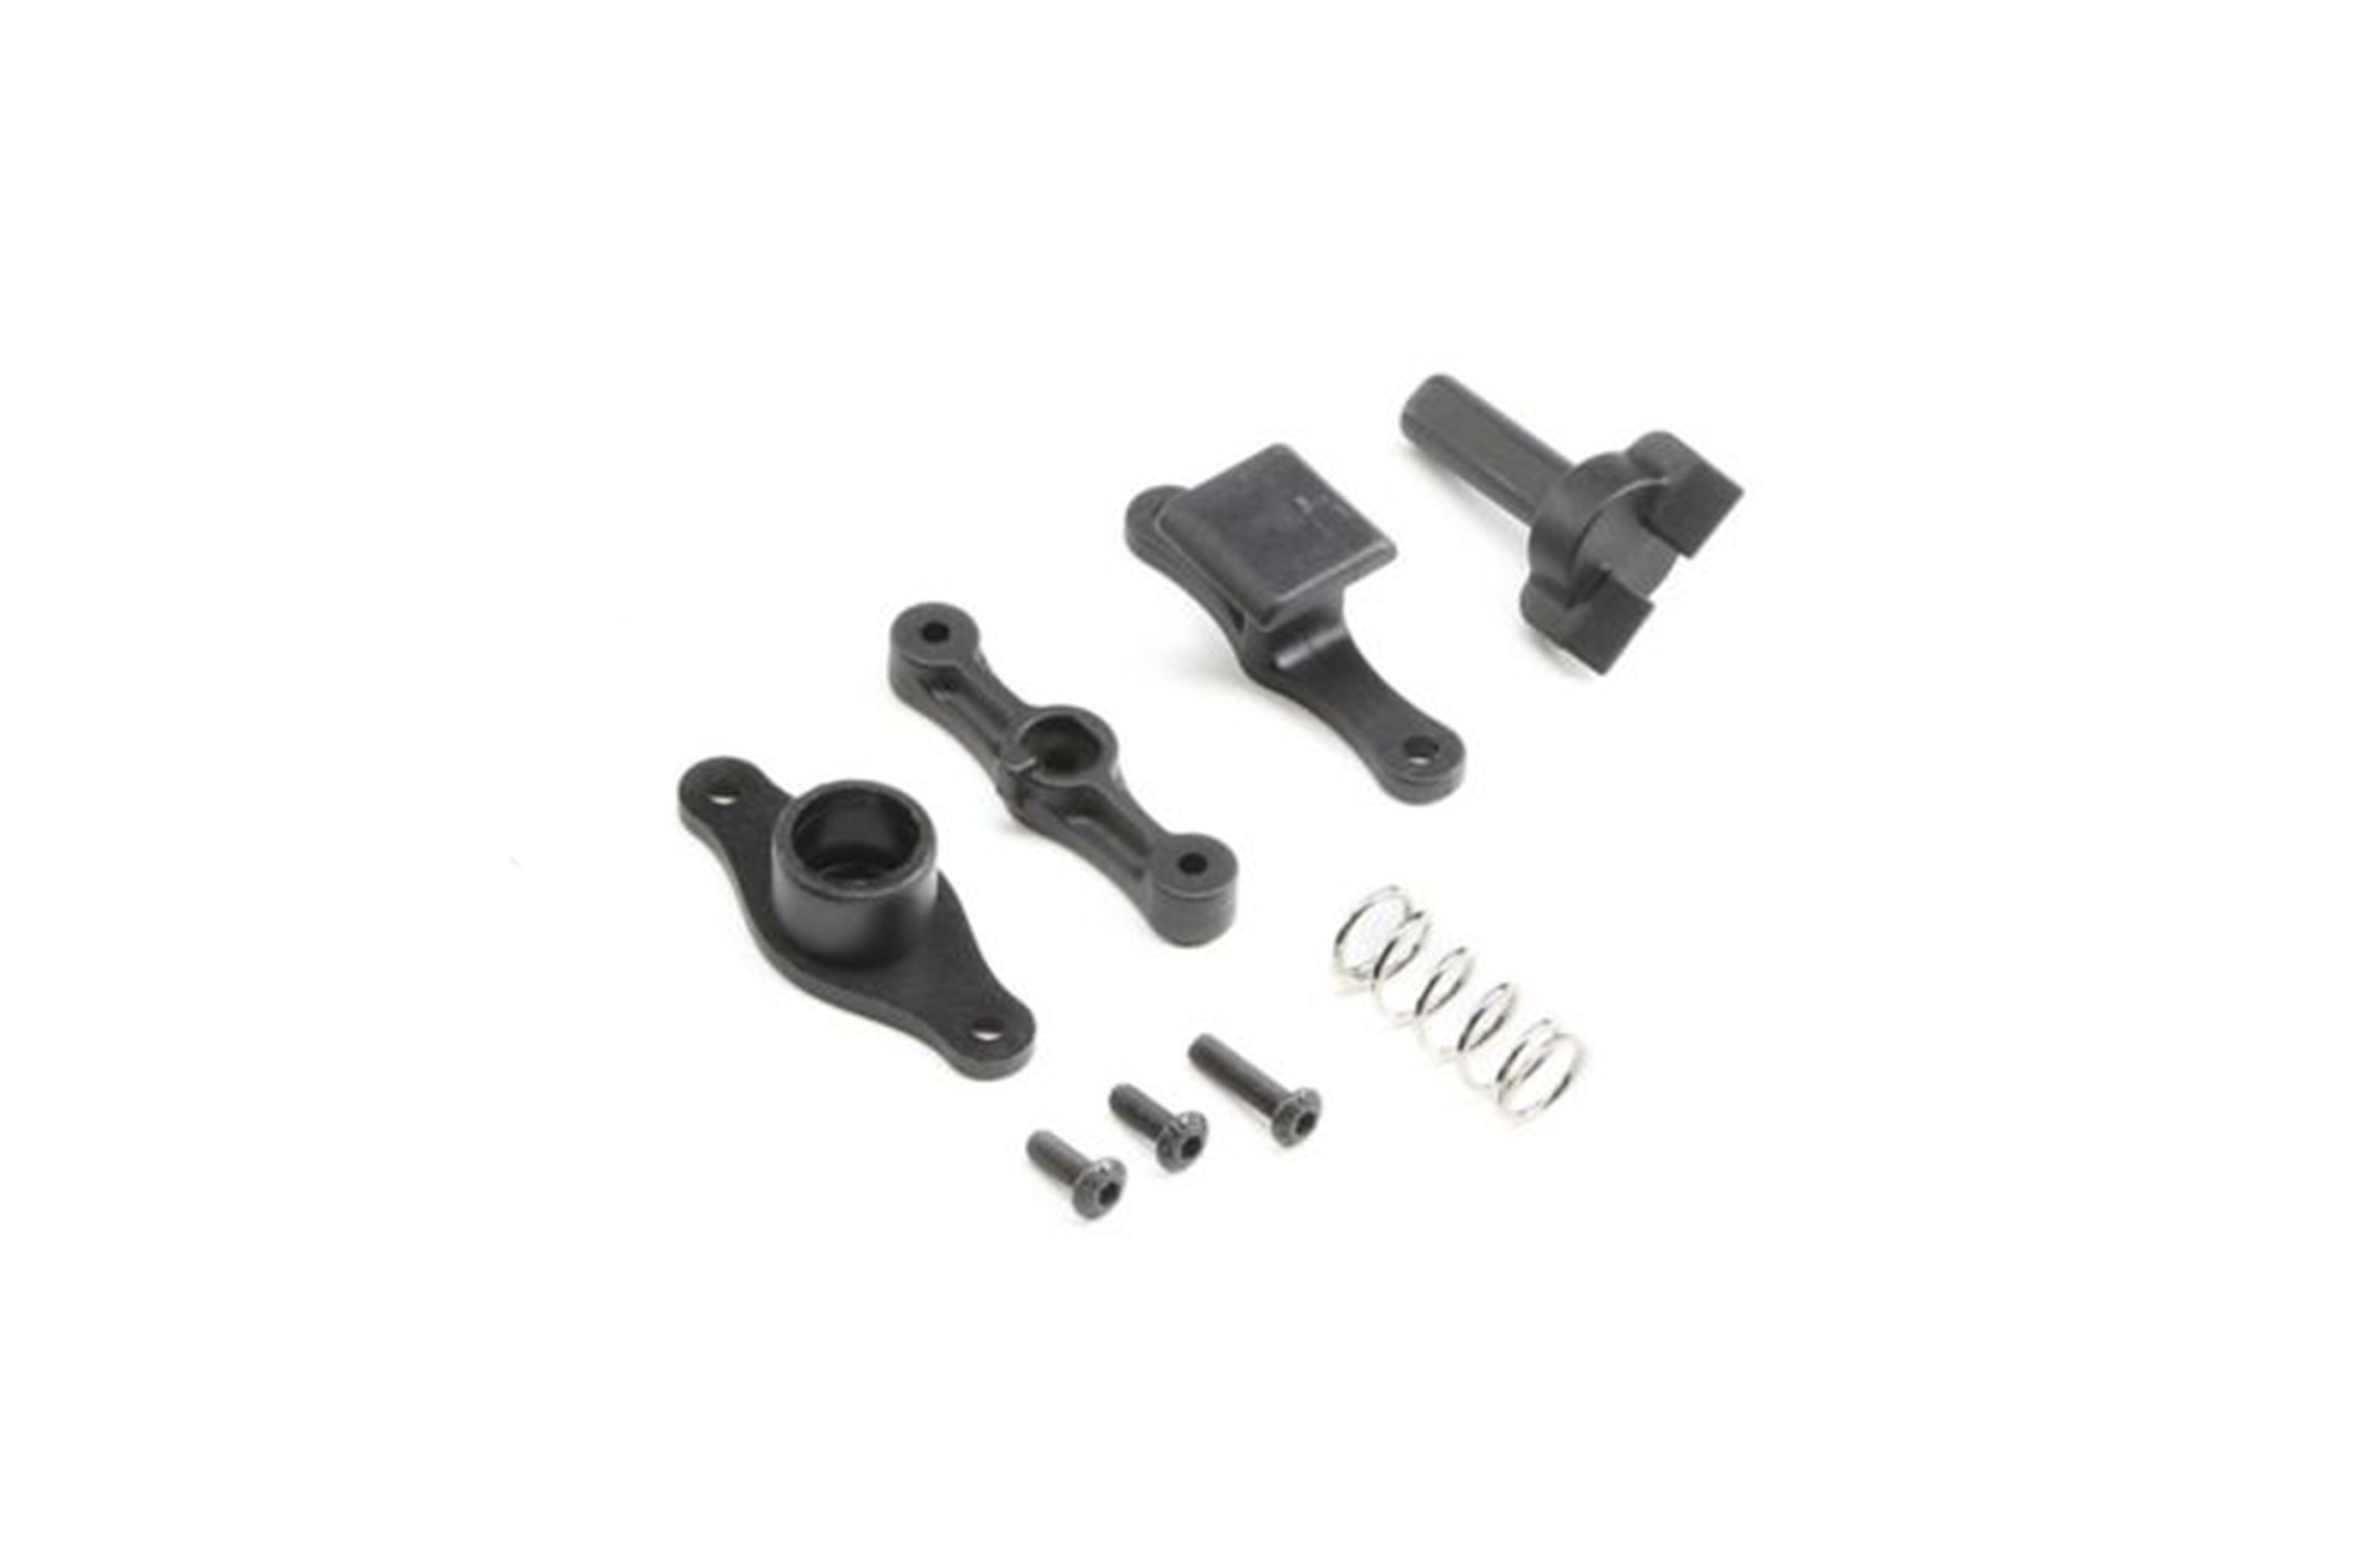 LOS251081/01 Losi Spare parts for Battery Tray for Super Rock Rey